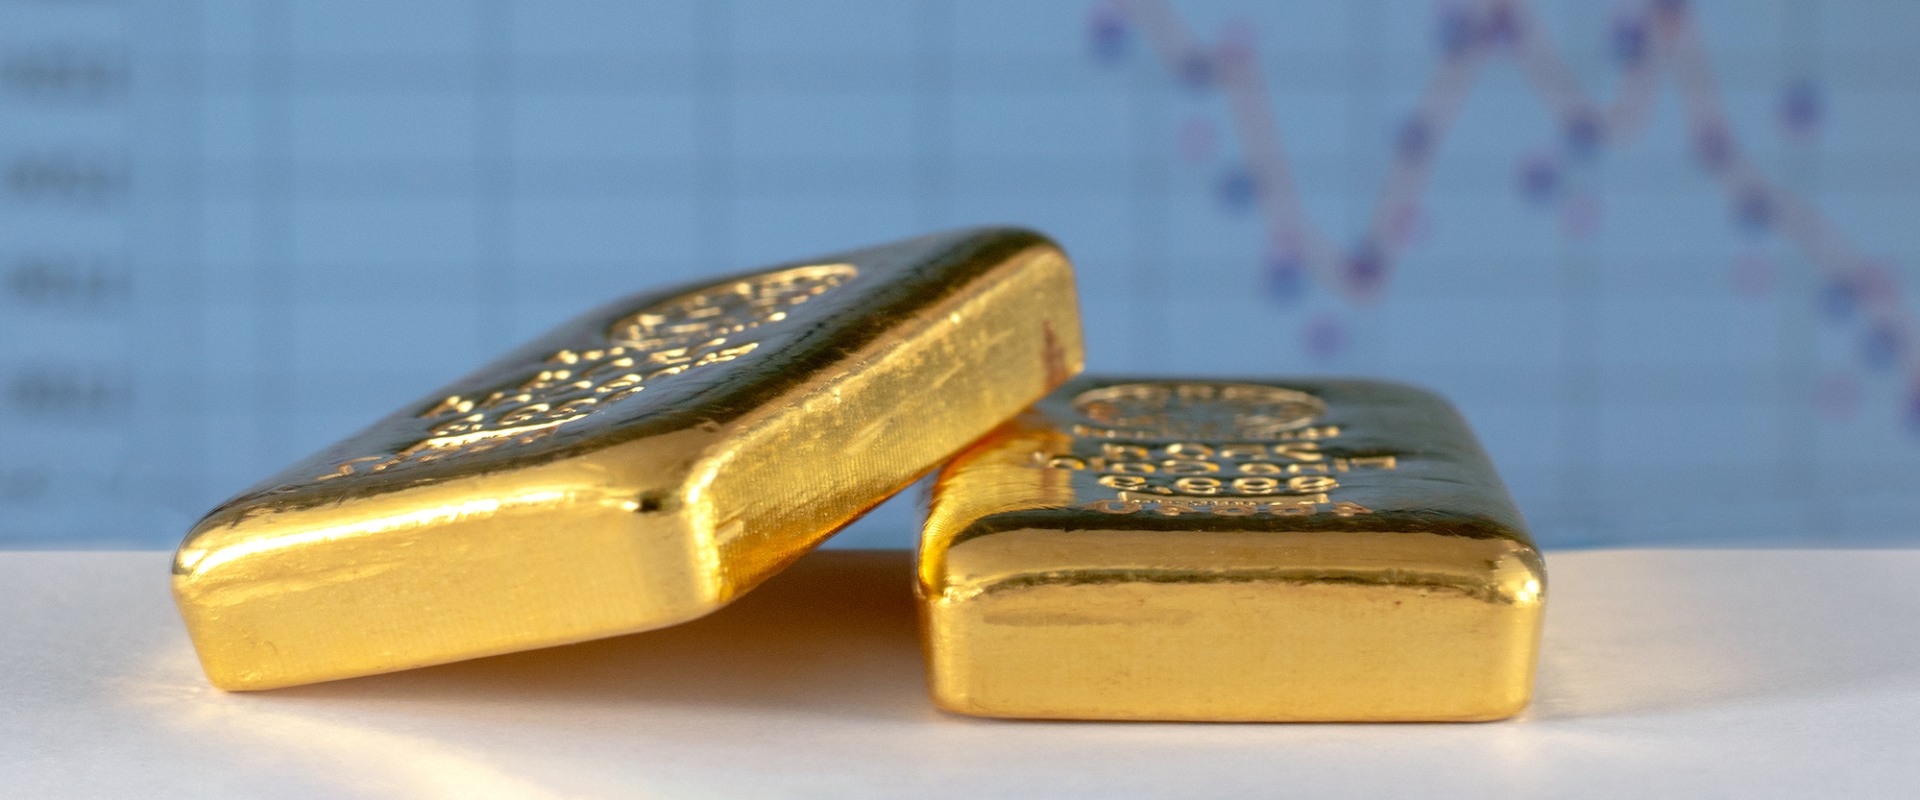 Is gold good for trading?